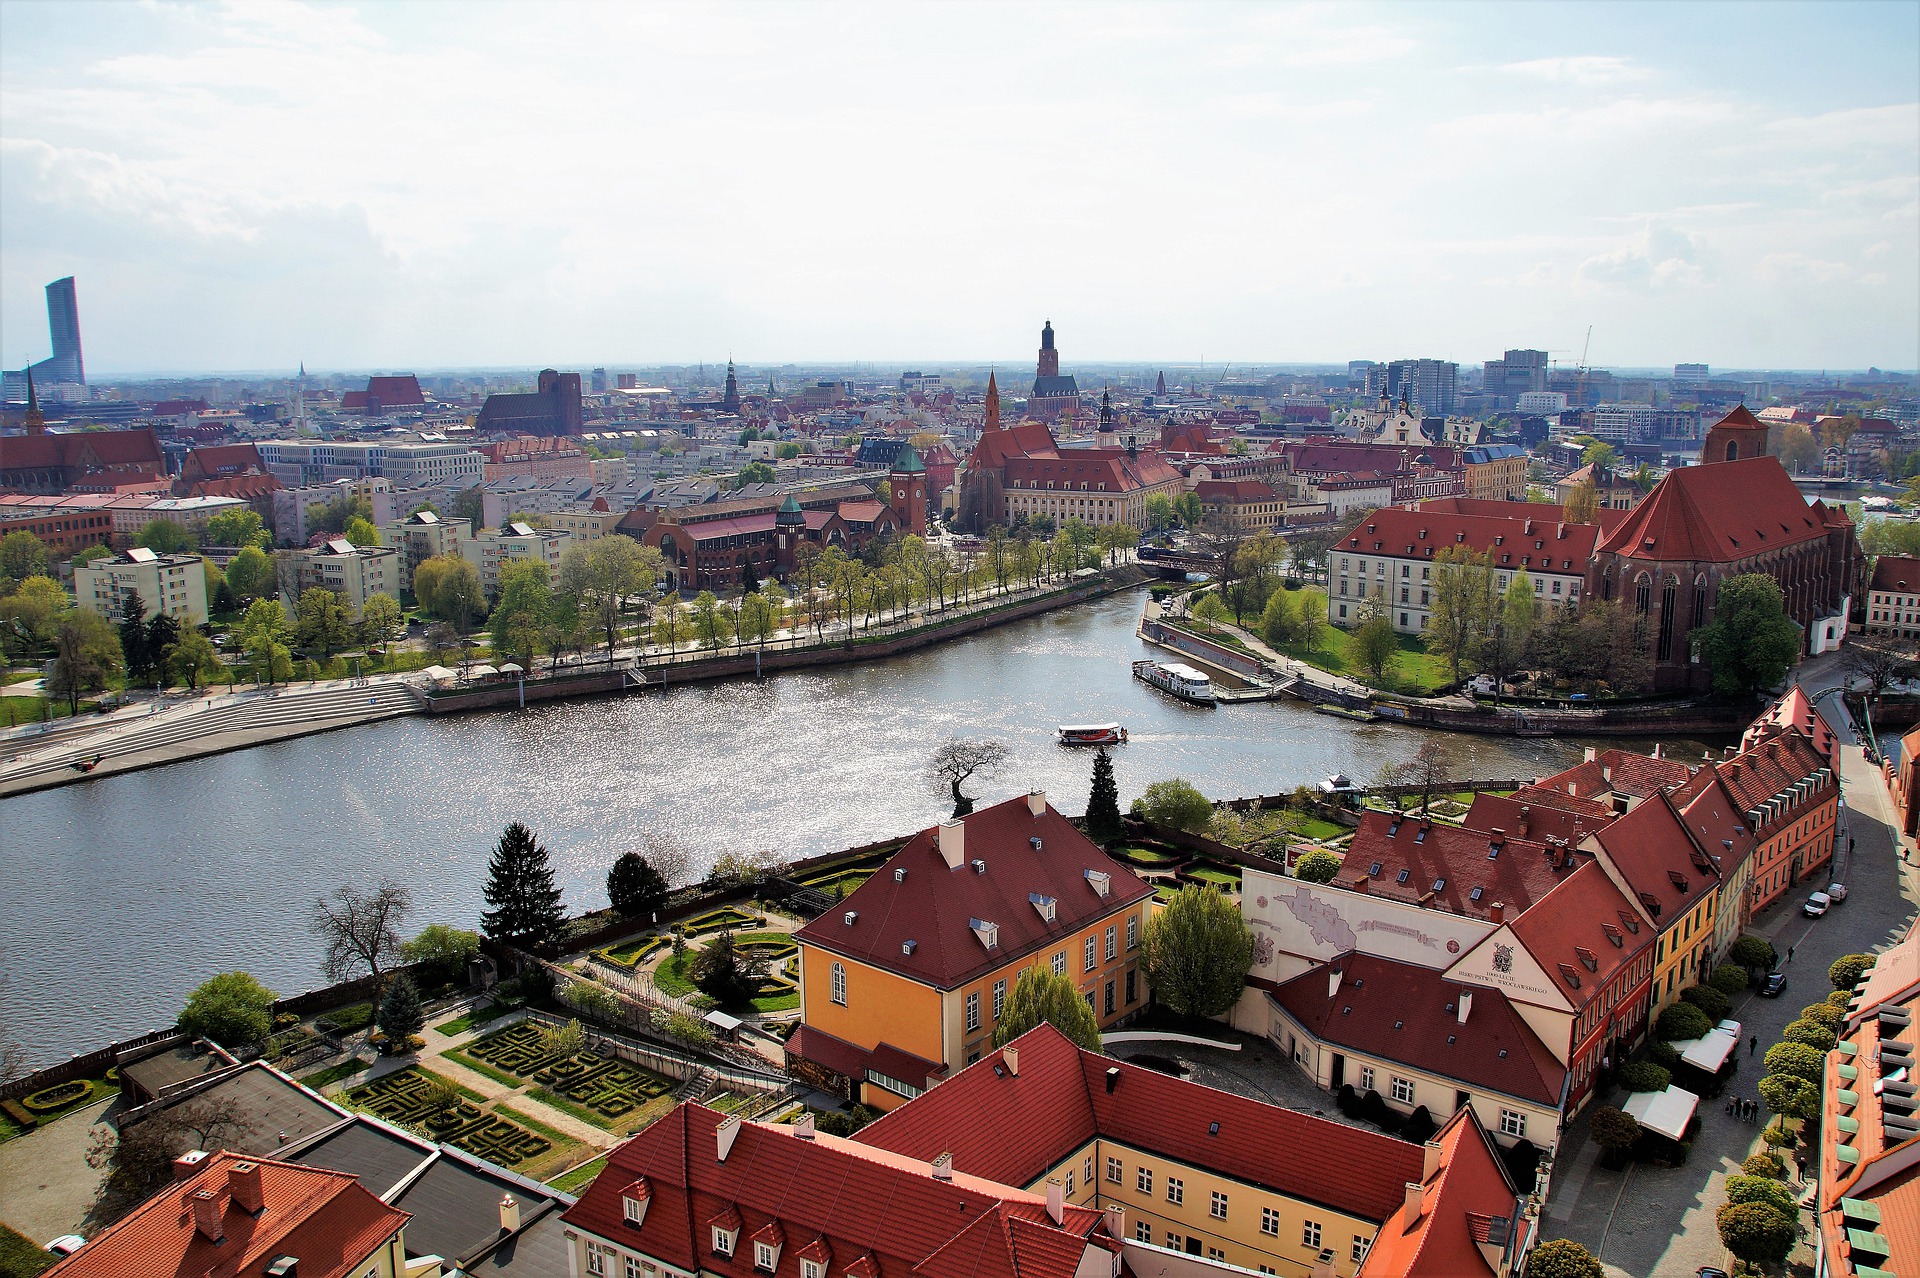 Wrocław Tourist Information Centers: Essential Guide to Maps, Brochures, and Expert Advice